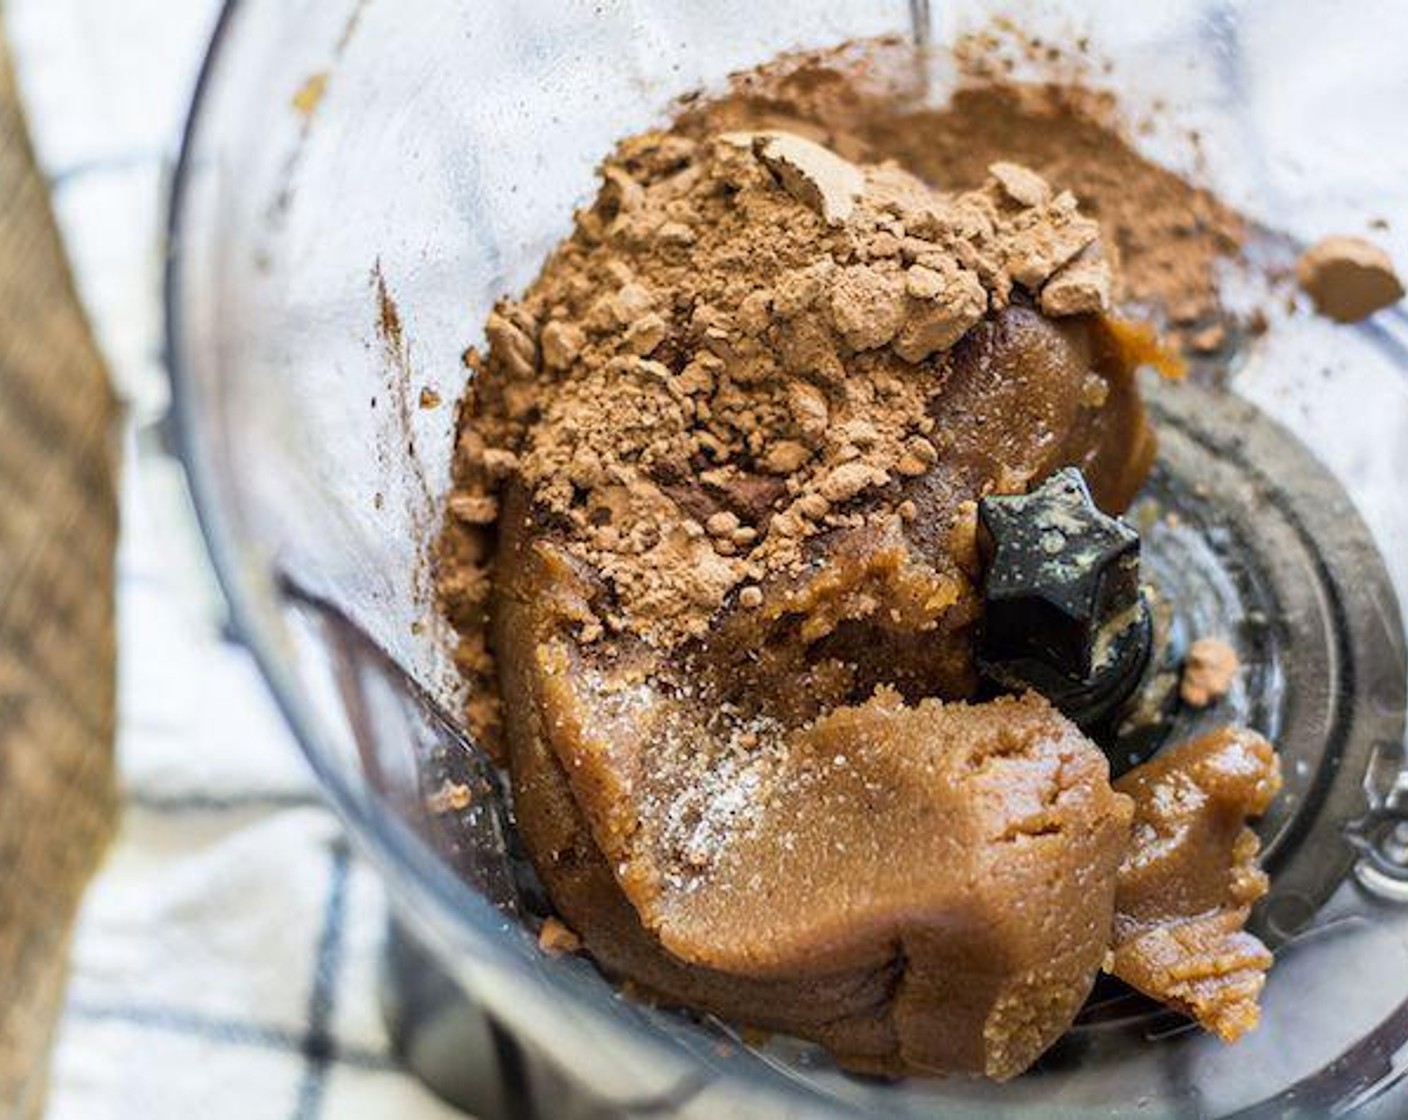 step 2 Combine Chocolate Ice Cream (1 cup) with Almond Milk (1/4 cup) in a food processor. Blend for 5-7 seconds or until well combined. Use a spatula to transfer the ice cream/almond mixture to a separate bowl.